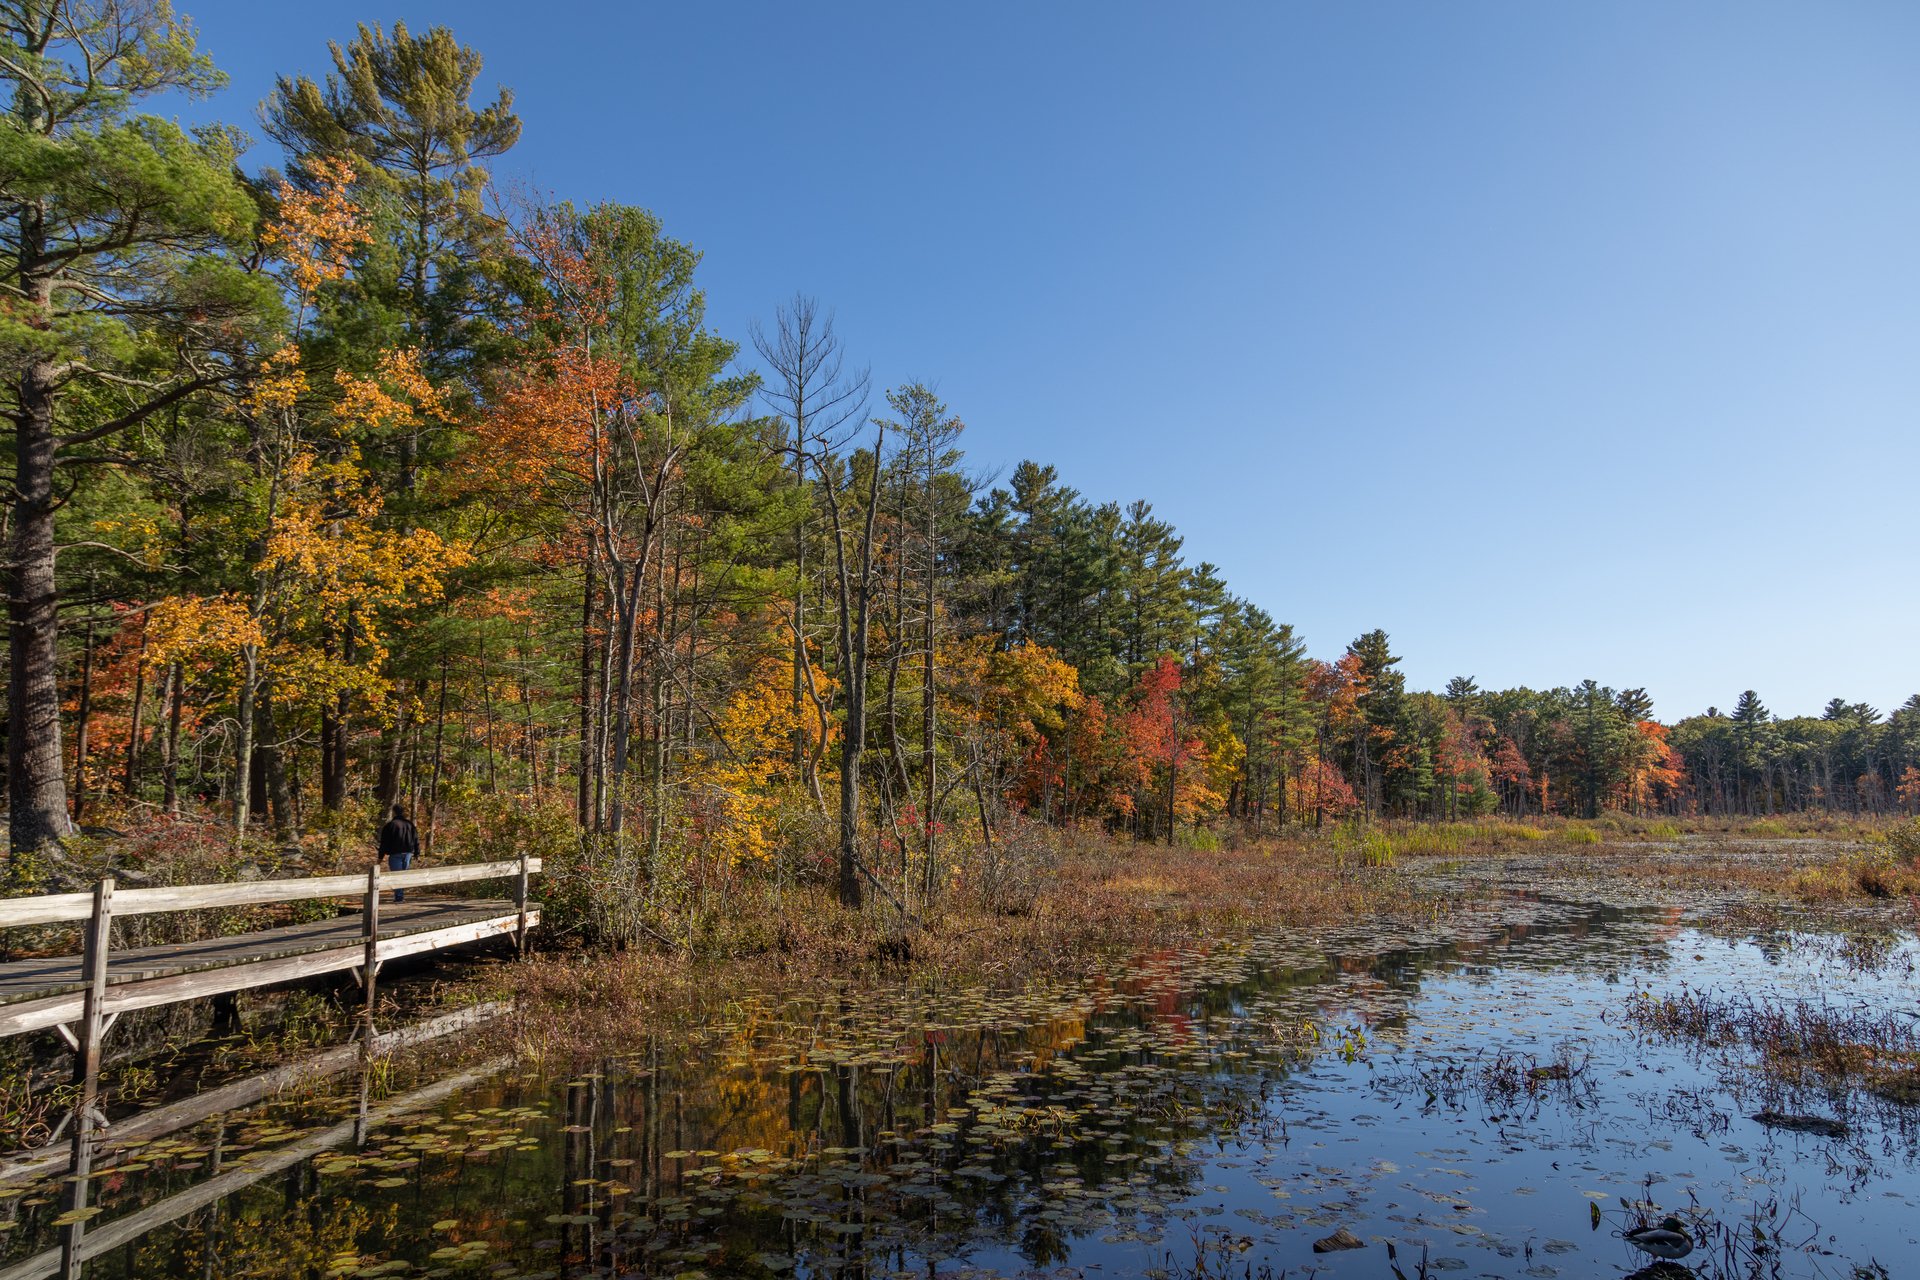 Yellow, orange, and green trees line a pond with grassy vegetation. A boardwalk over the water leading into the woods is on the left.